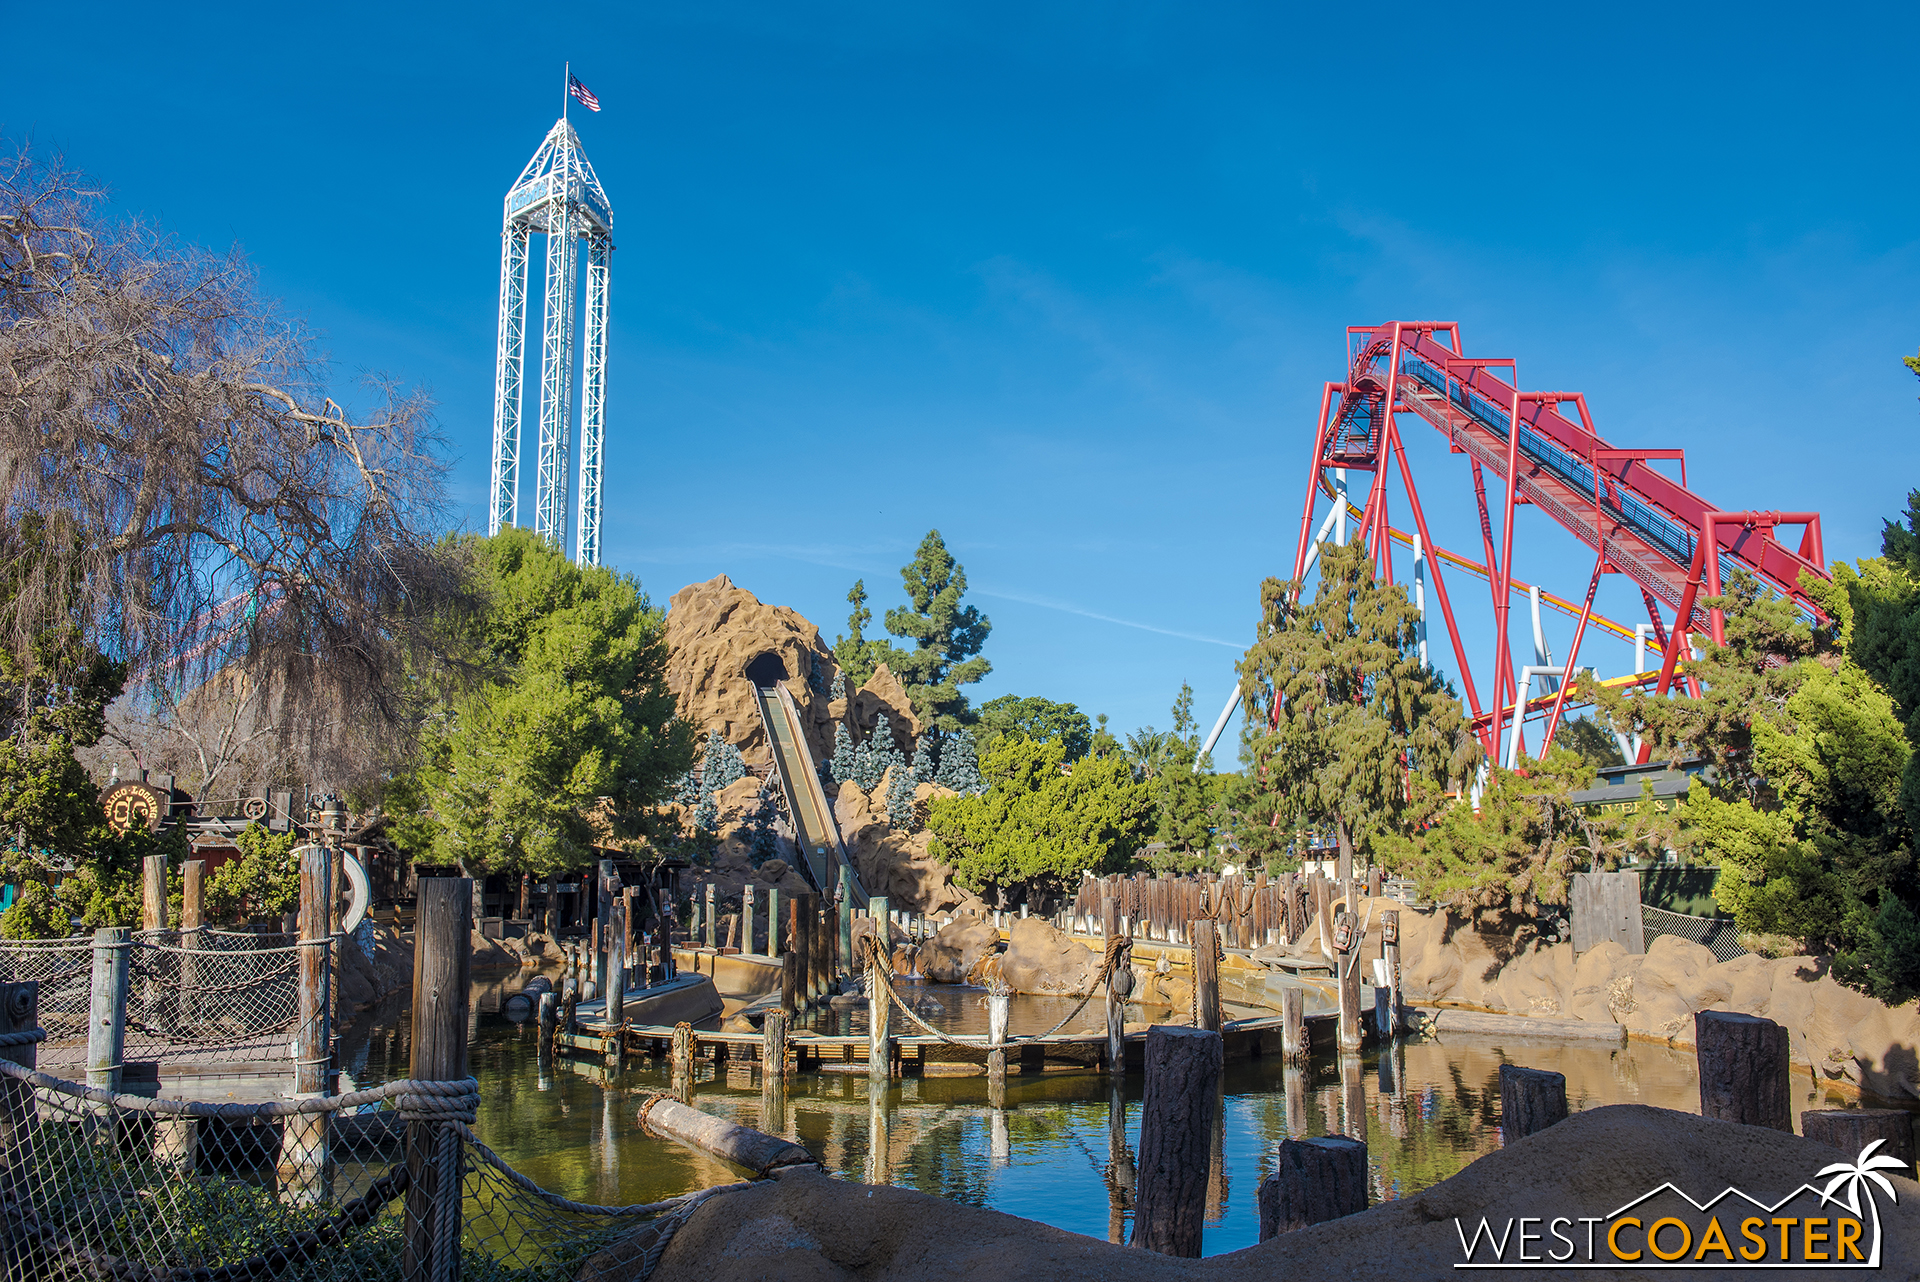  Log Ride and Splash Mountain have gone south for the winter. 